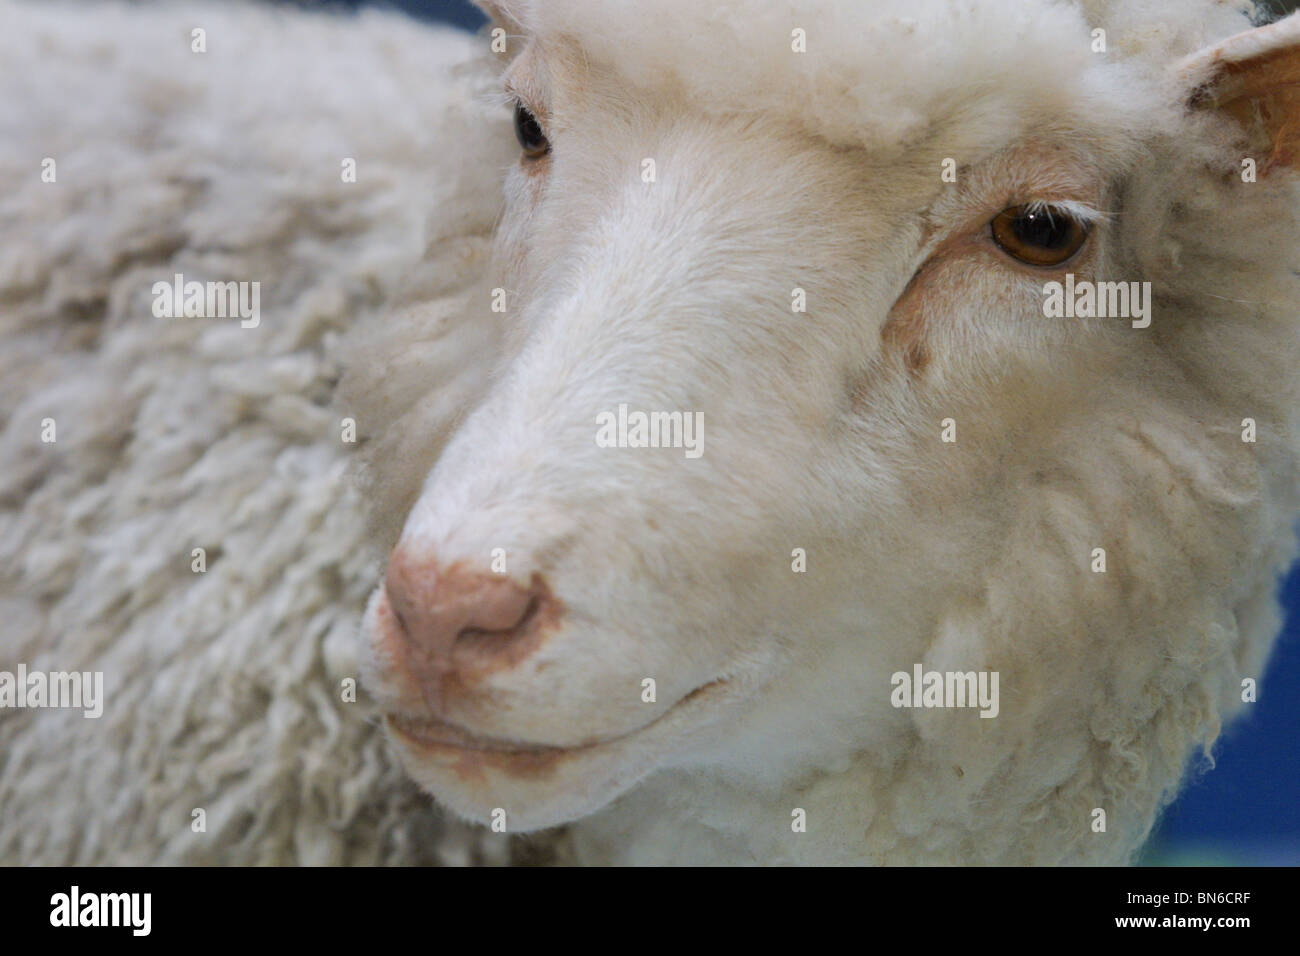 Dolly The Sheep, the world's first cloned mammal, created by Professor Sir Ian Wilmut, on display at Royal Museum of Scotland. Stock Photo